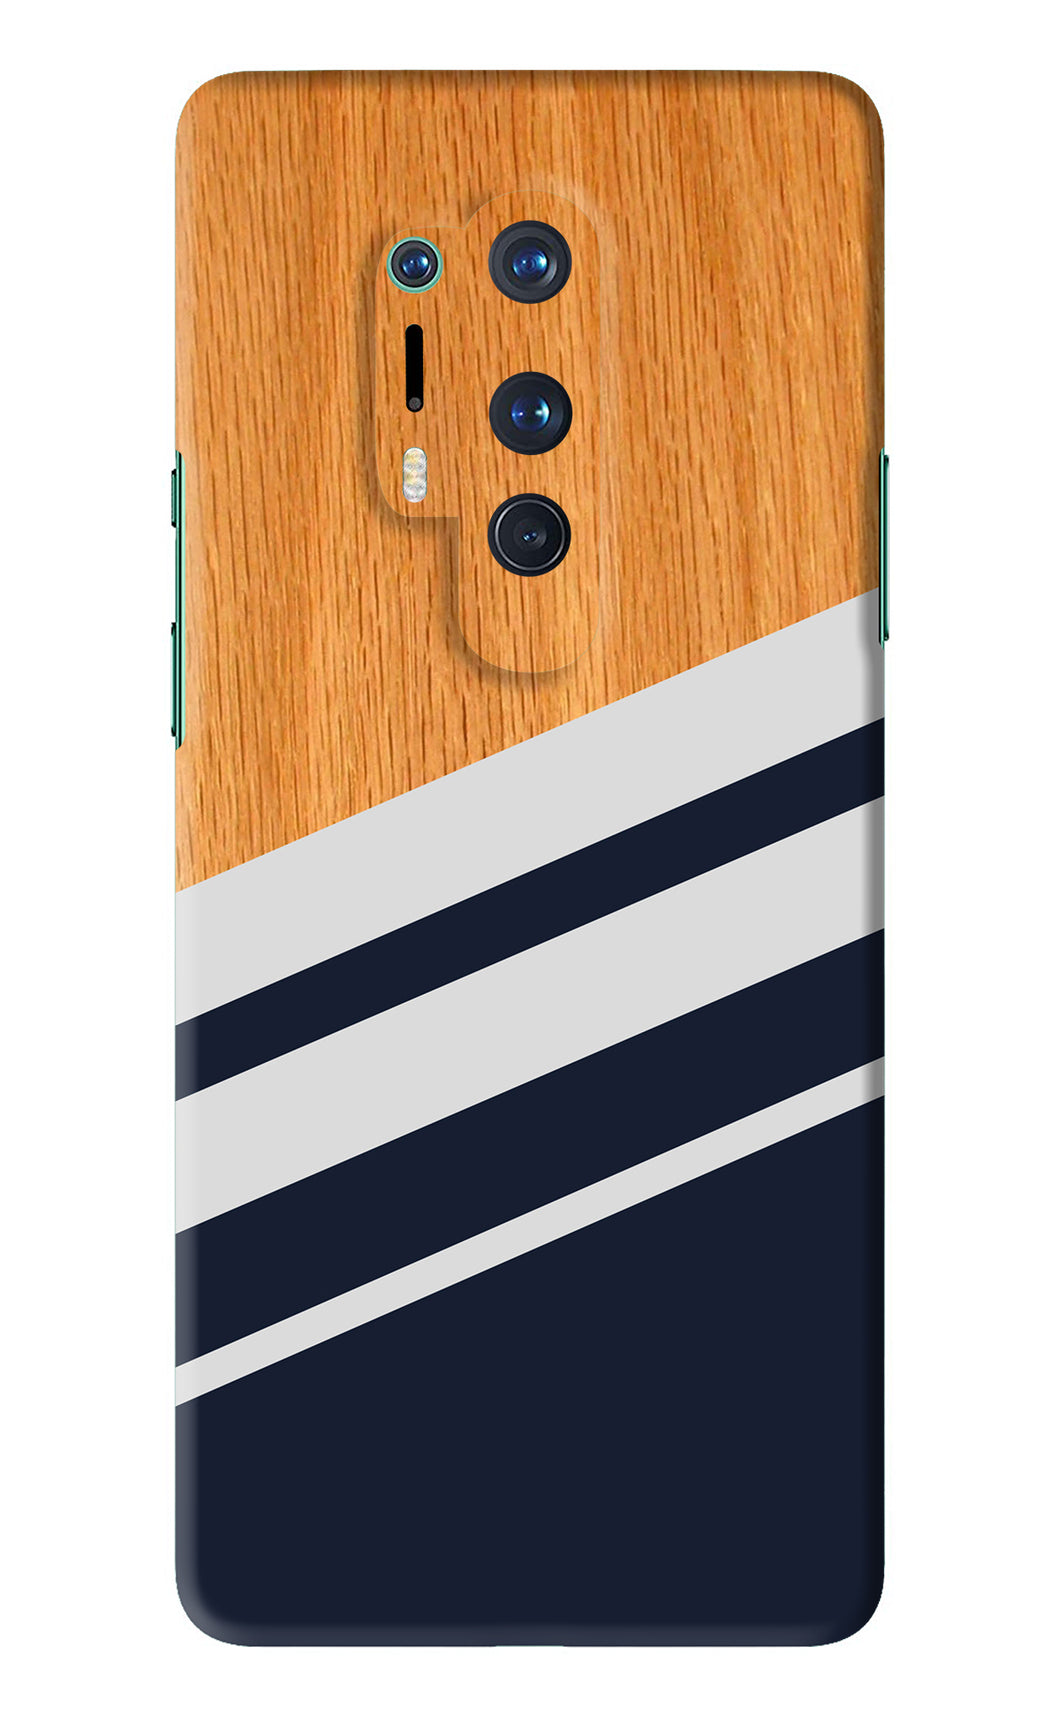 Black And White Wooden OnePlus 8 Pro Back Skin Wrap